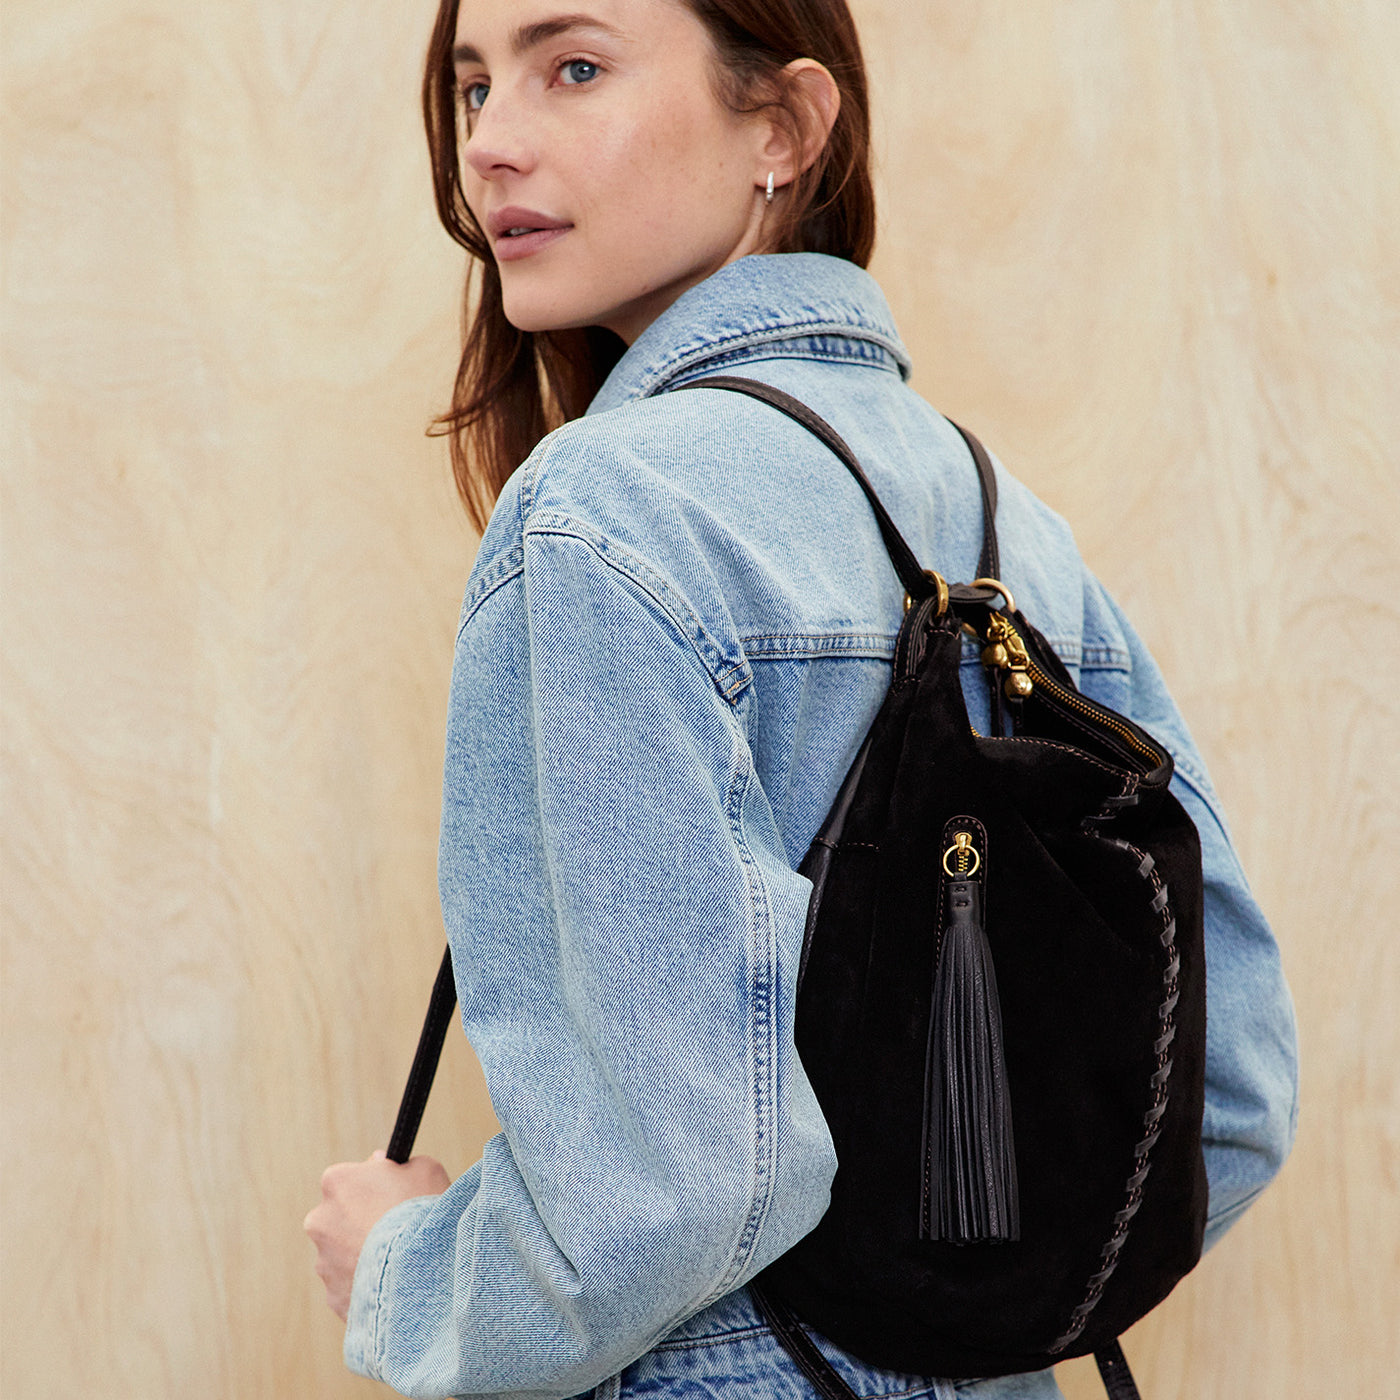 Merrin Convertible Backpack in Suede With Whipstitch - Black